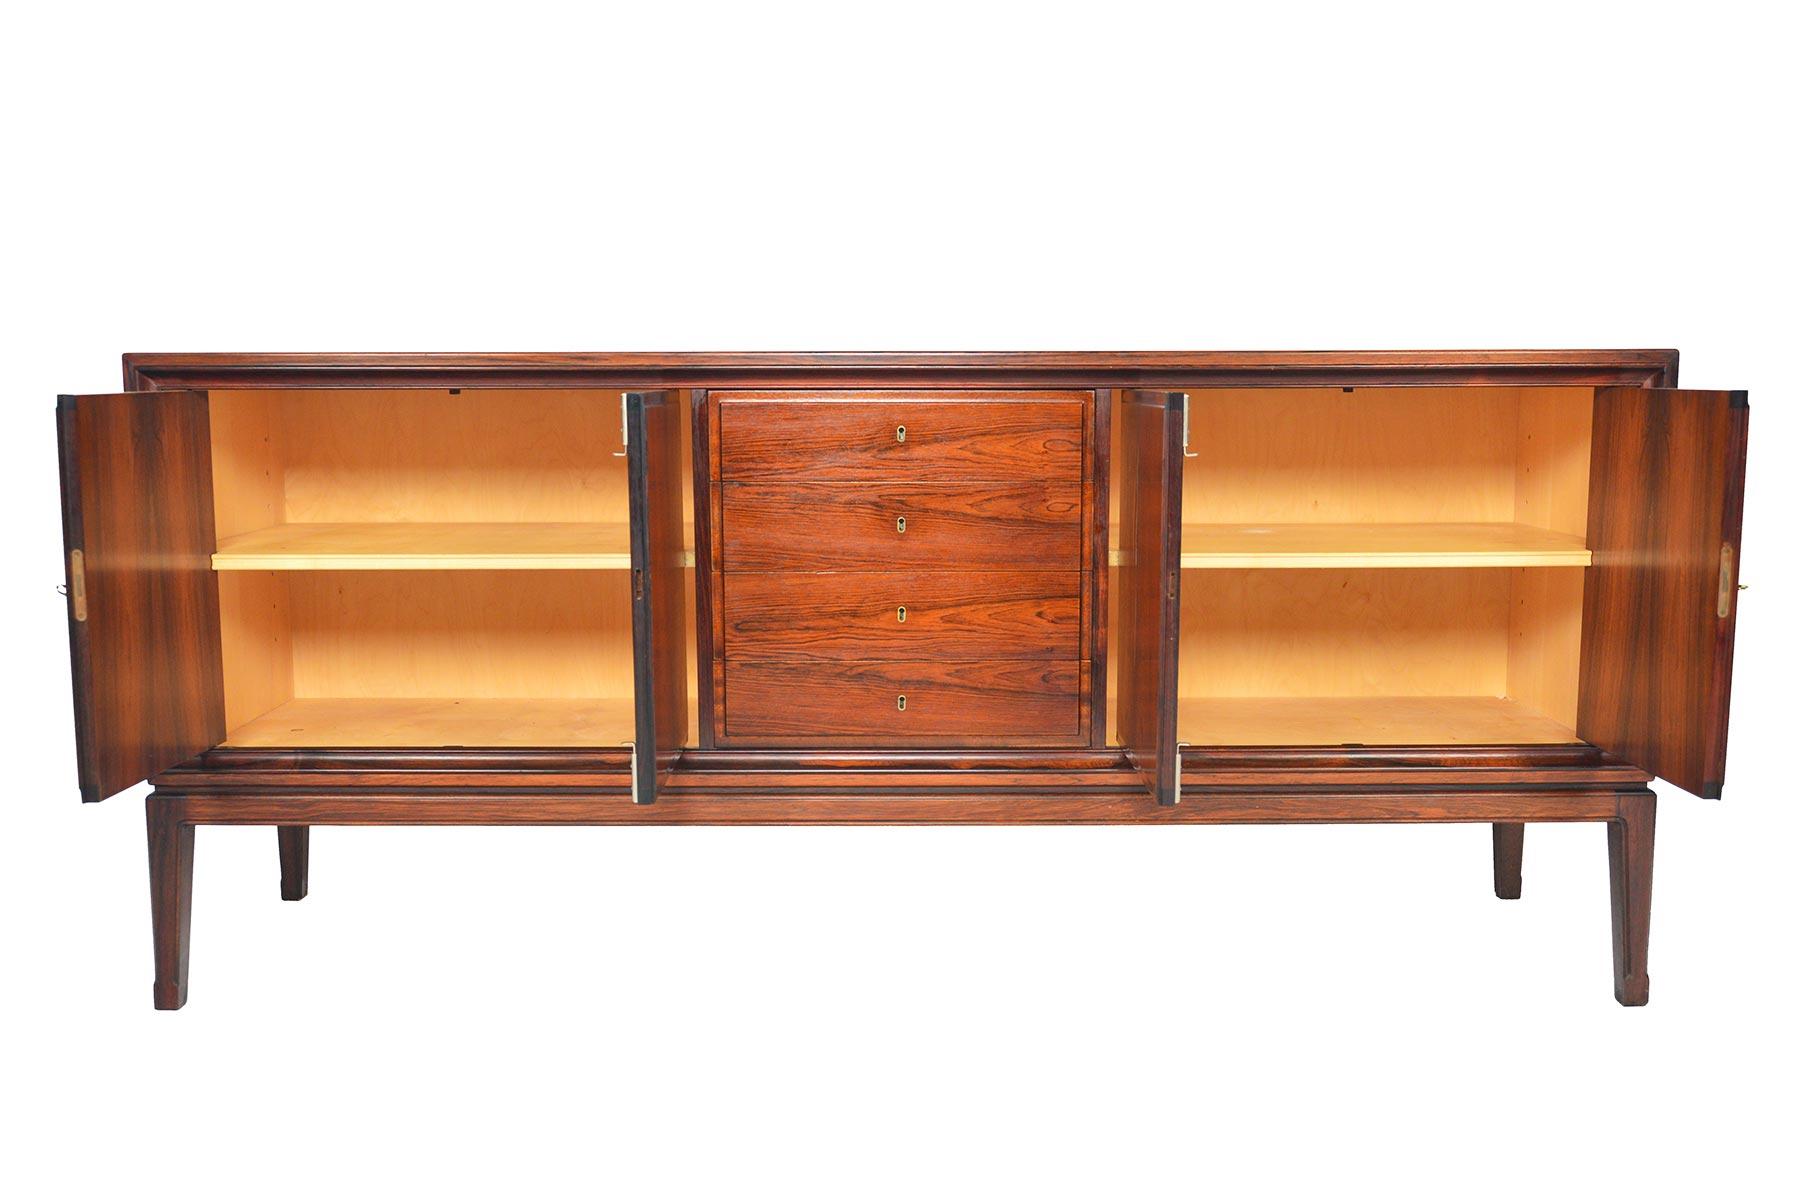 This stunning Danish modern rosewood credenza features traditional design details in a modern package! The flush face is free of handles or drawer pulls and uses original keys as pulls. Beautiful routed banding adorns the doors and drawers. Two